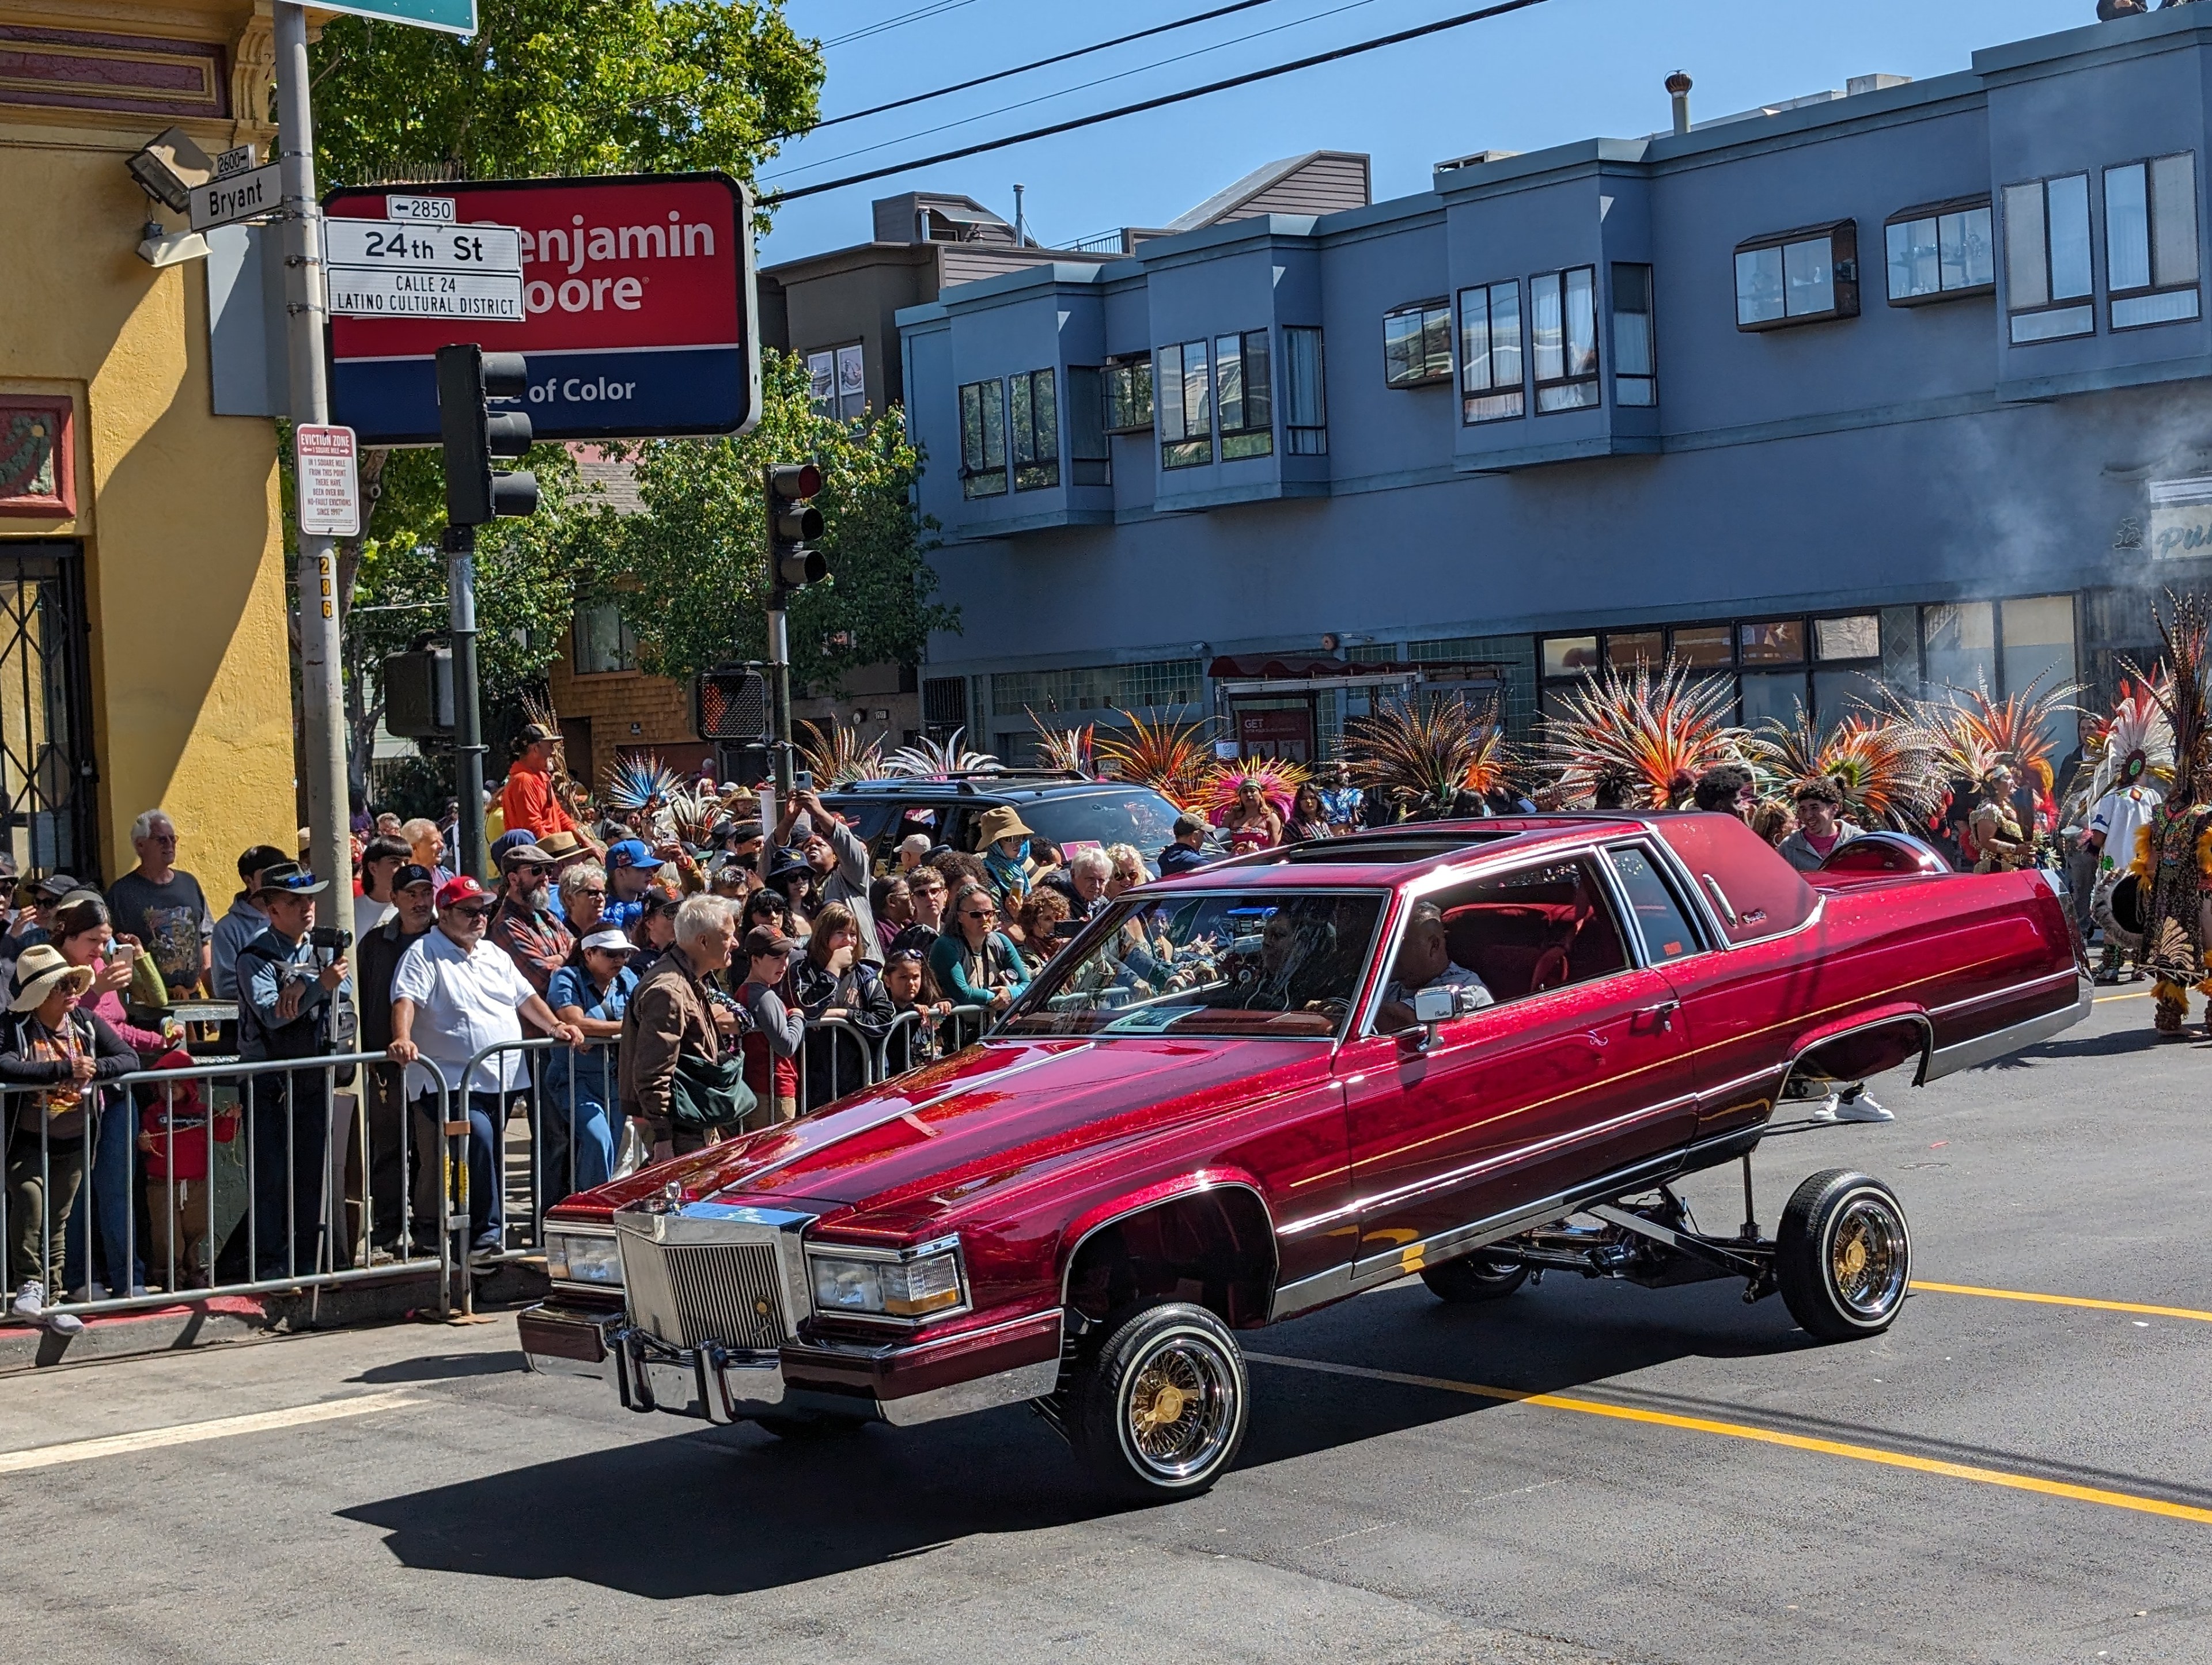 A candy apple red Cadillac on lifted wheels rides through a city intersection.